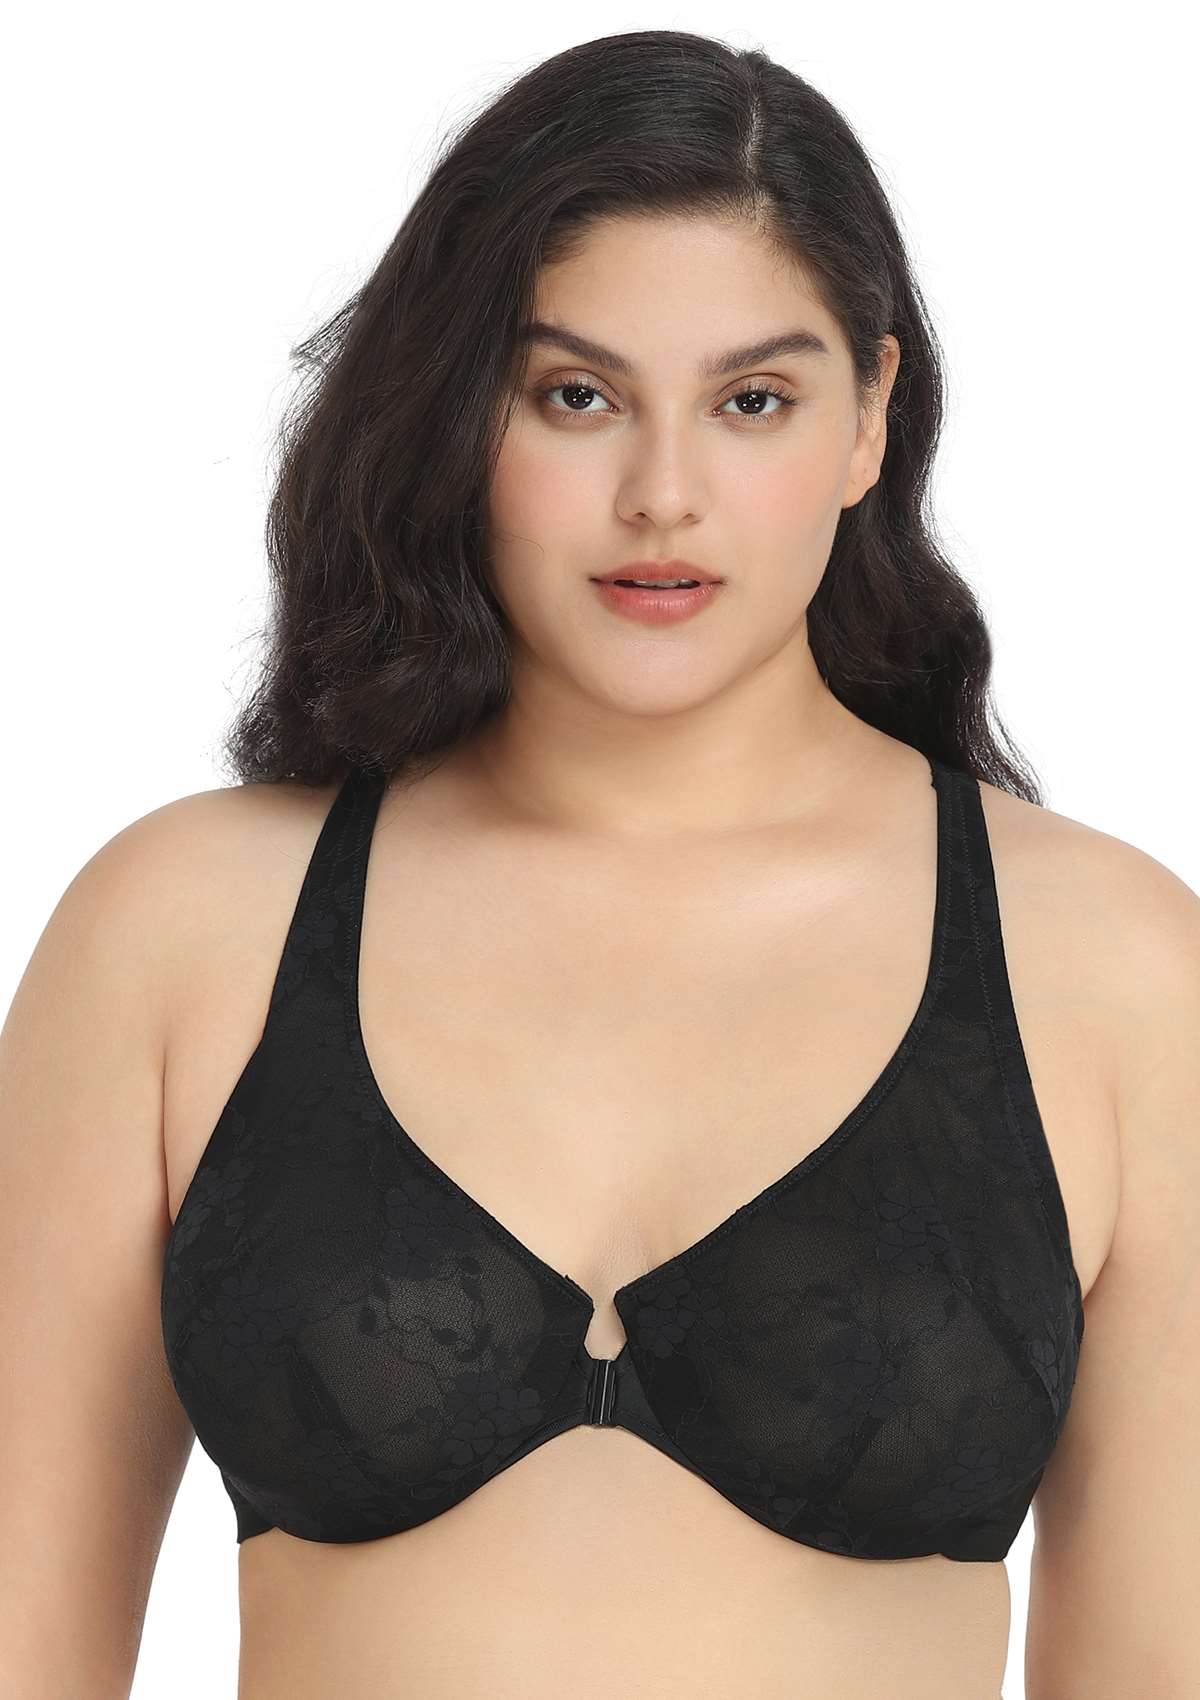 HSIA Spring Romance Front-Close Floral Lace Unlined Full Coverage Bra - Black / 40 / DD/E